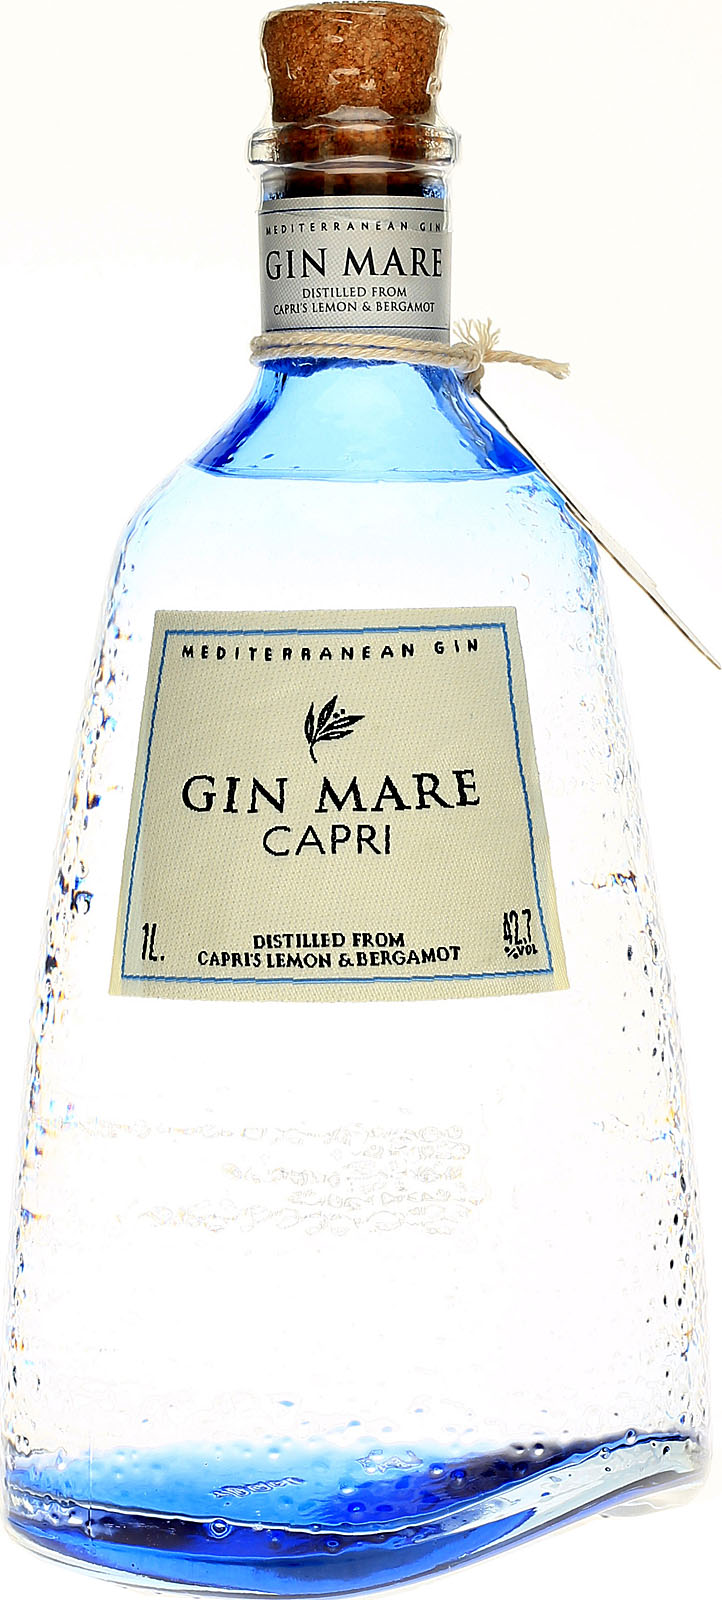 Anniversary 10th Edition Mare Gin Limited